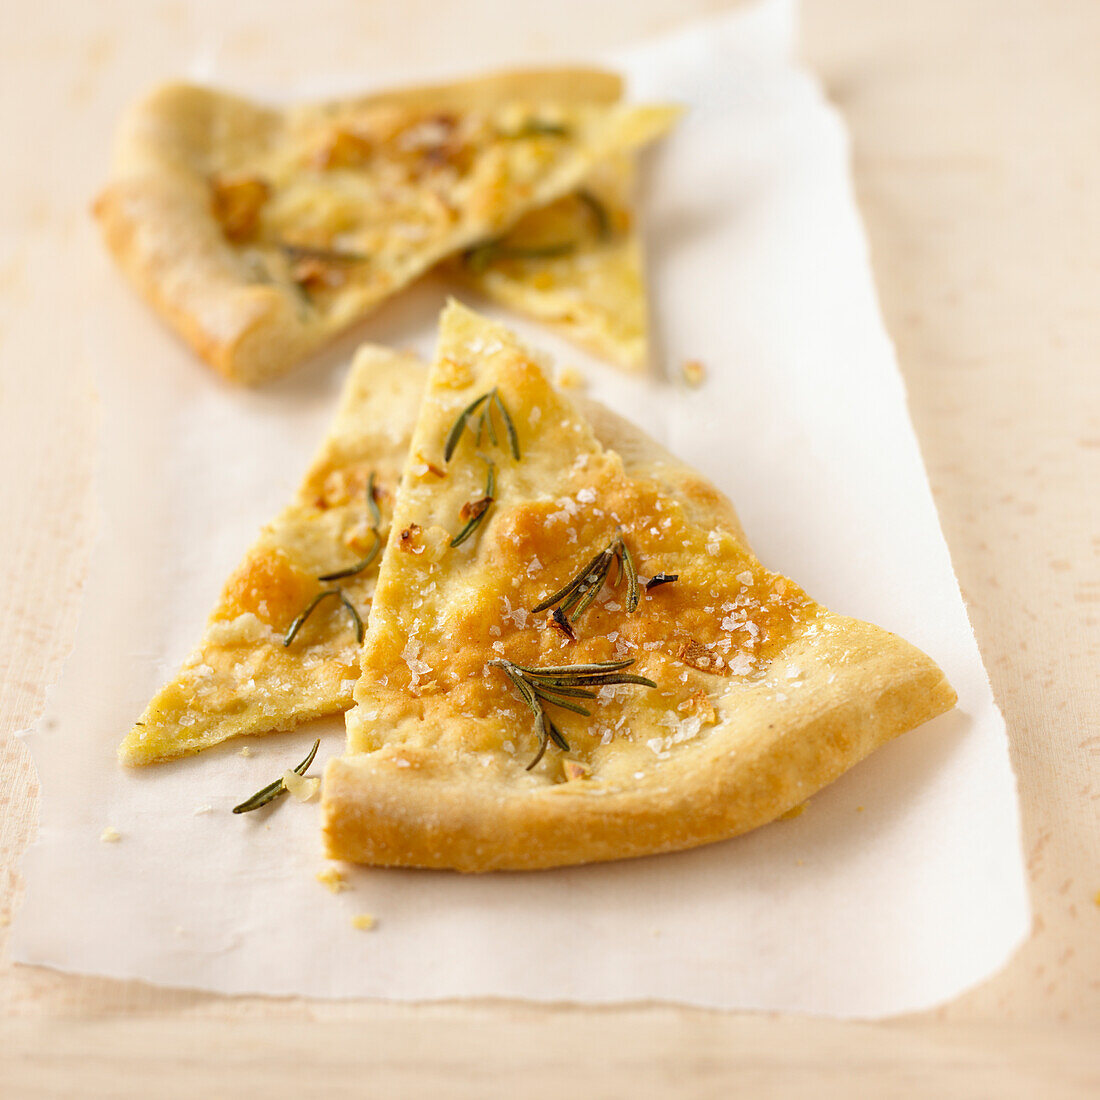 Pizza bianca with rosemary and garlic